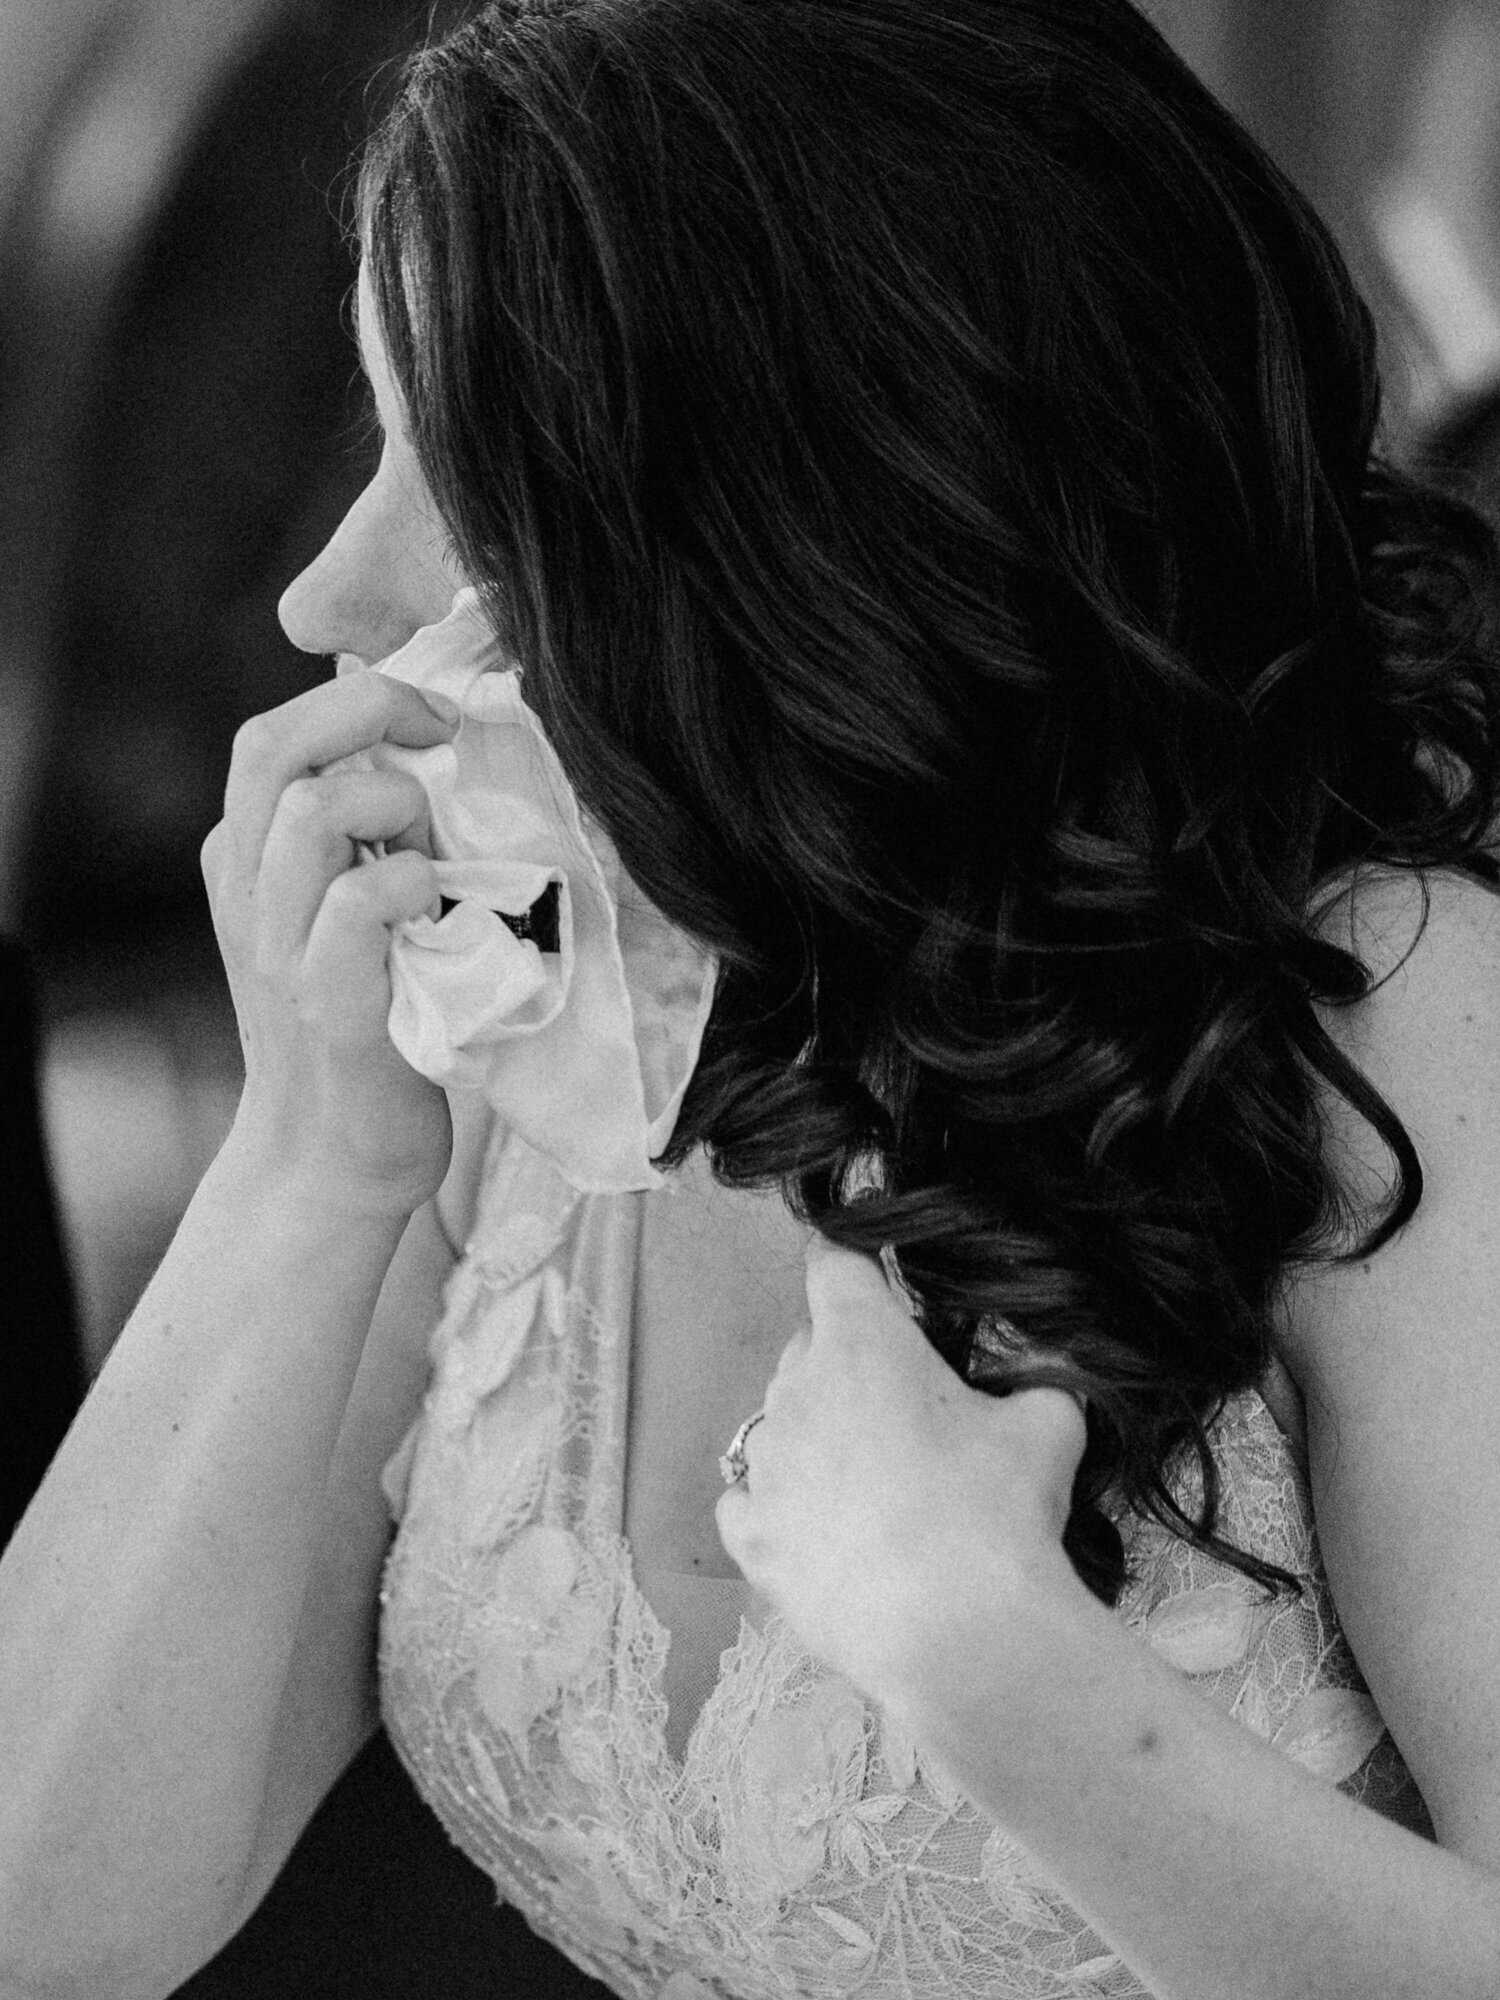 An emotional wedding reception photo of a bride shedding a tear during toasts given by her family